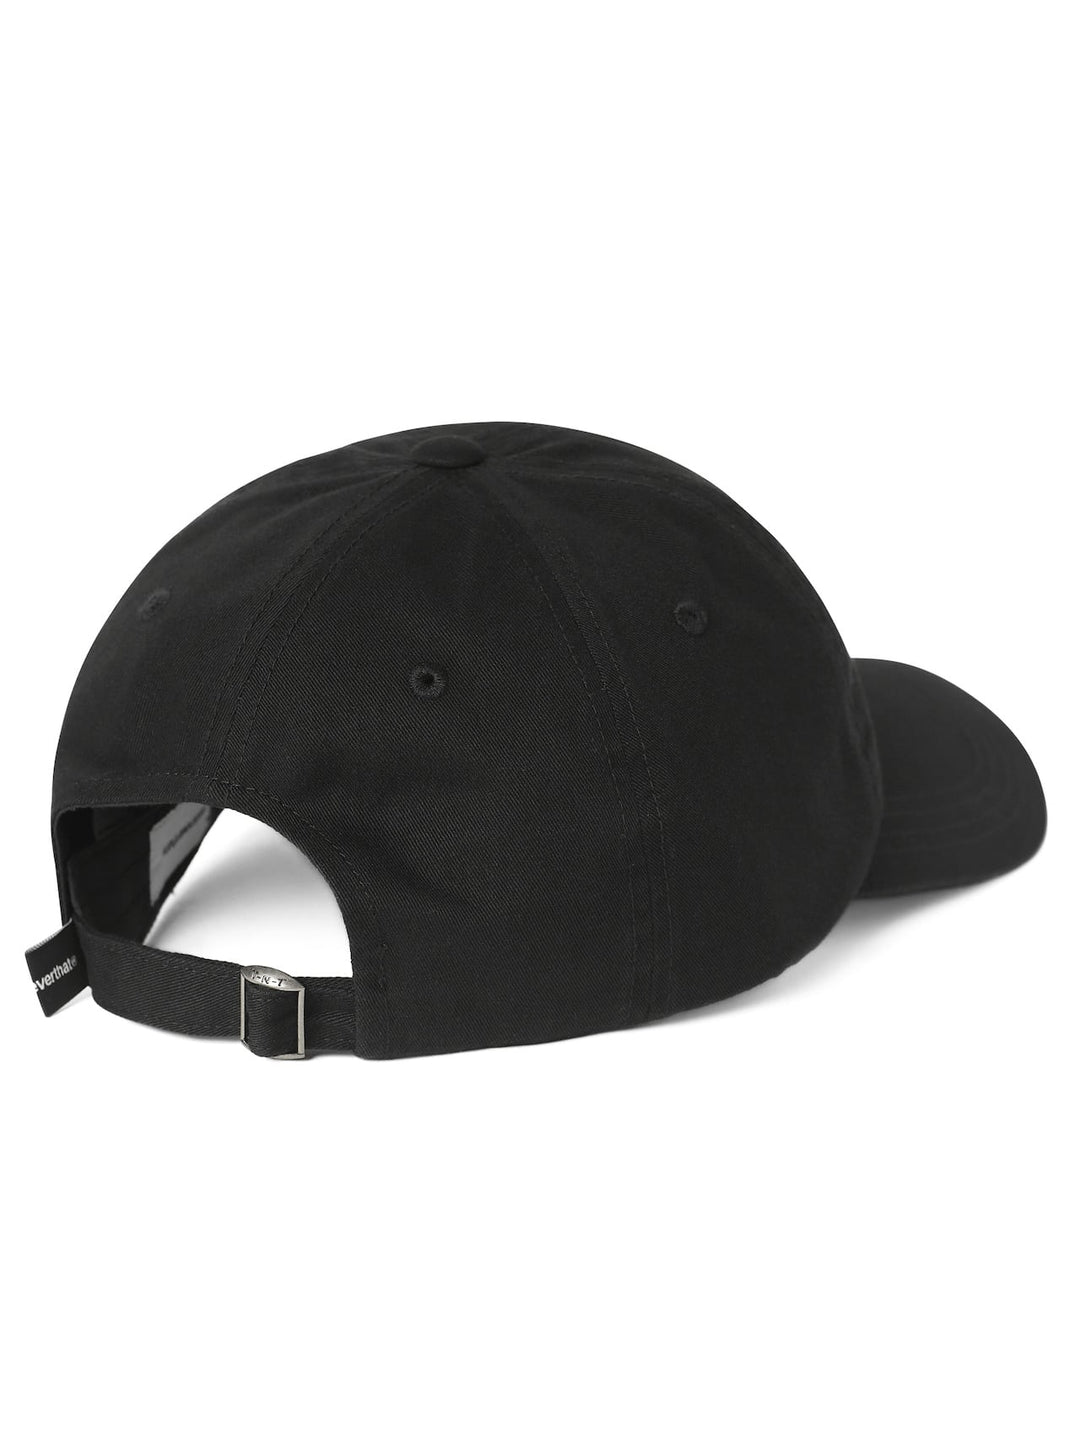 THIS IS NEVER THAT T-LOGO CAP-BLACK